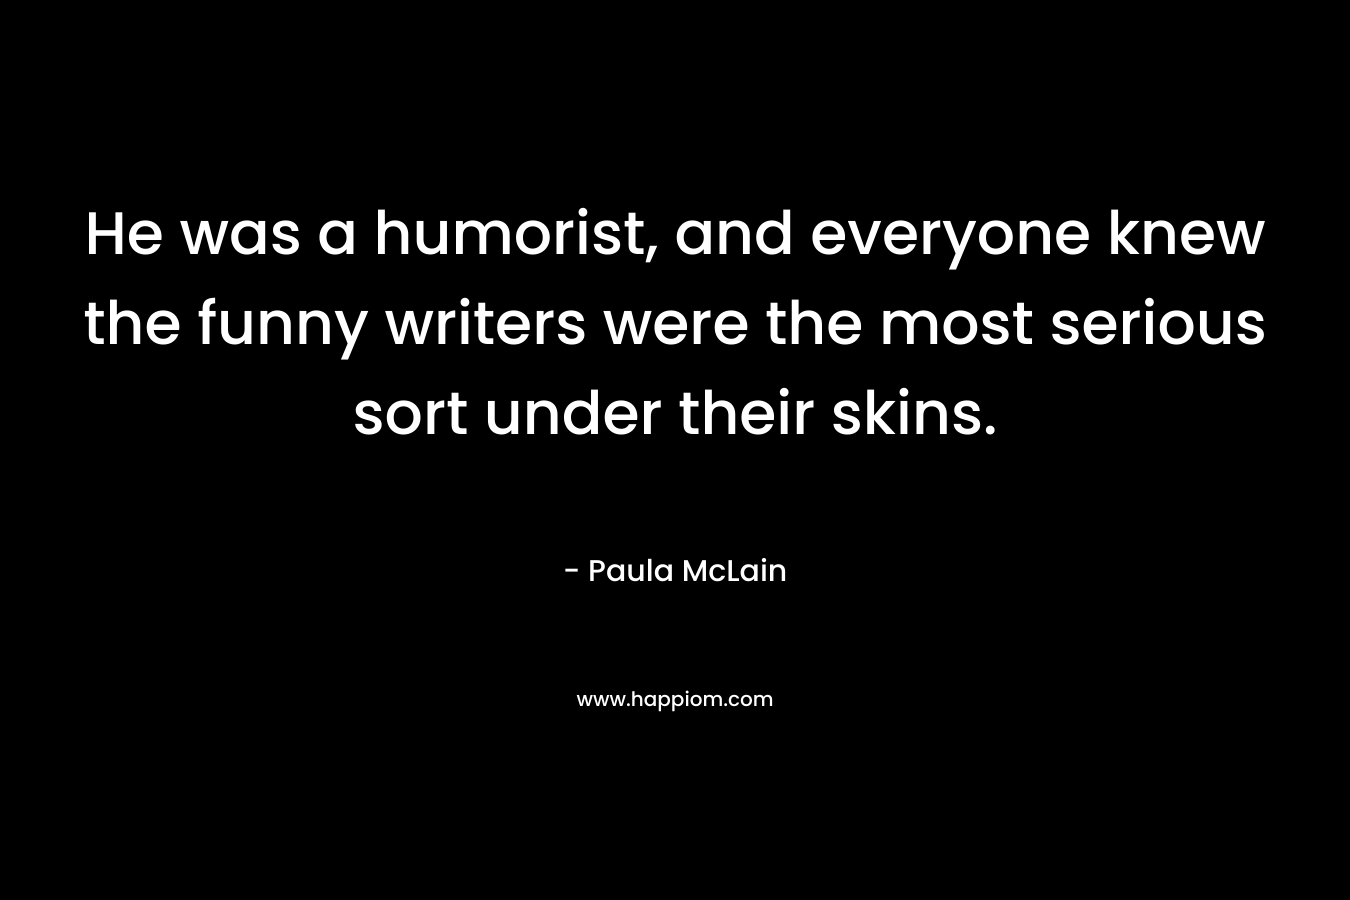 He was a humorist, and everyone knew the funny writers were the most serious sort under their skins. – Paula McLain